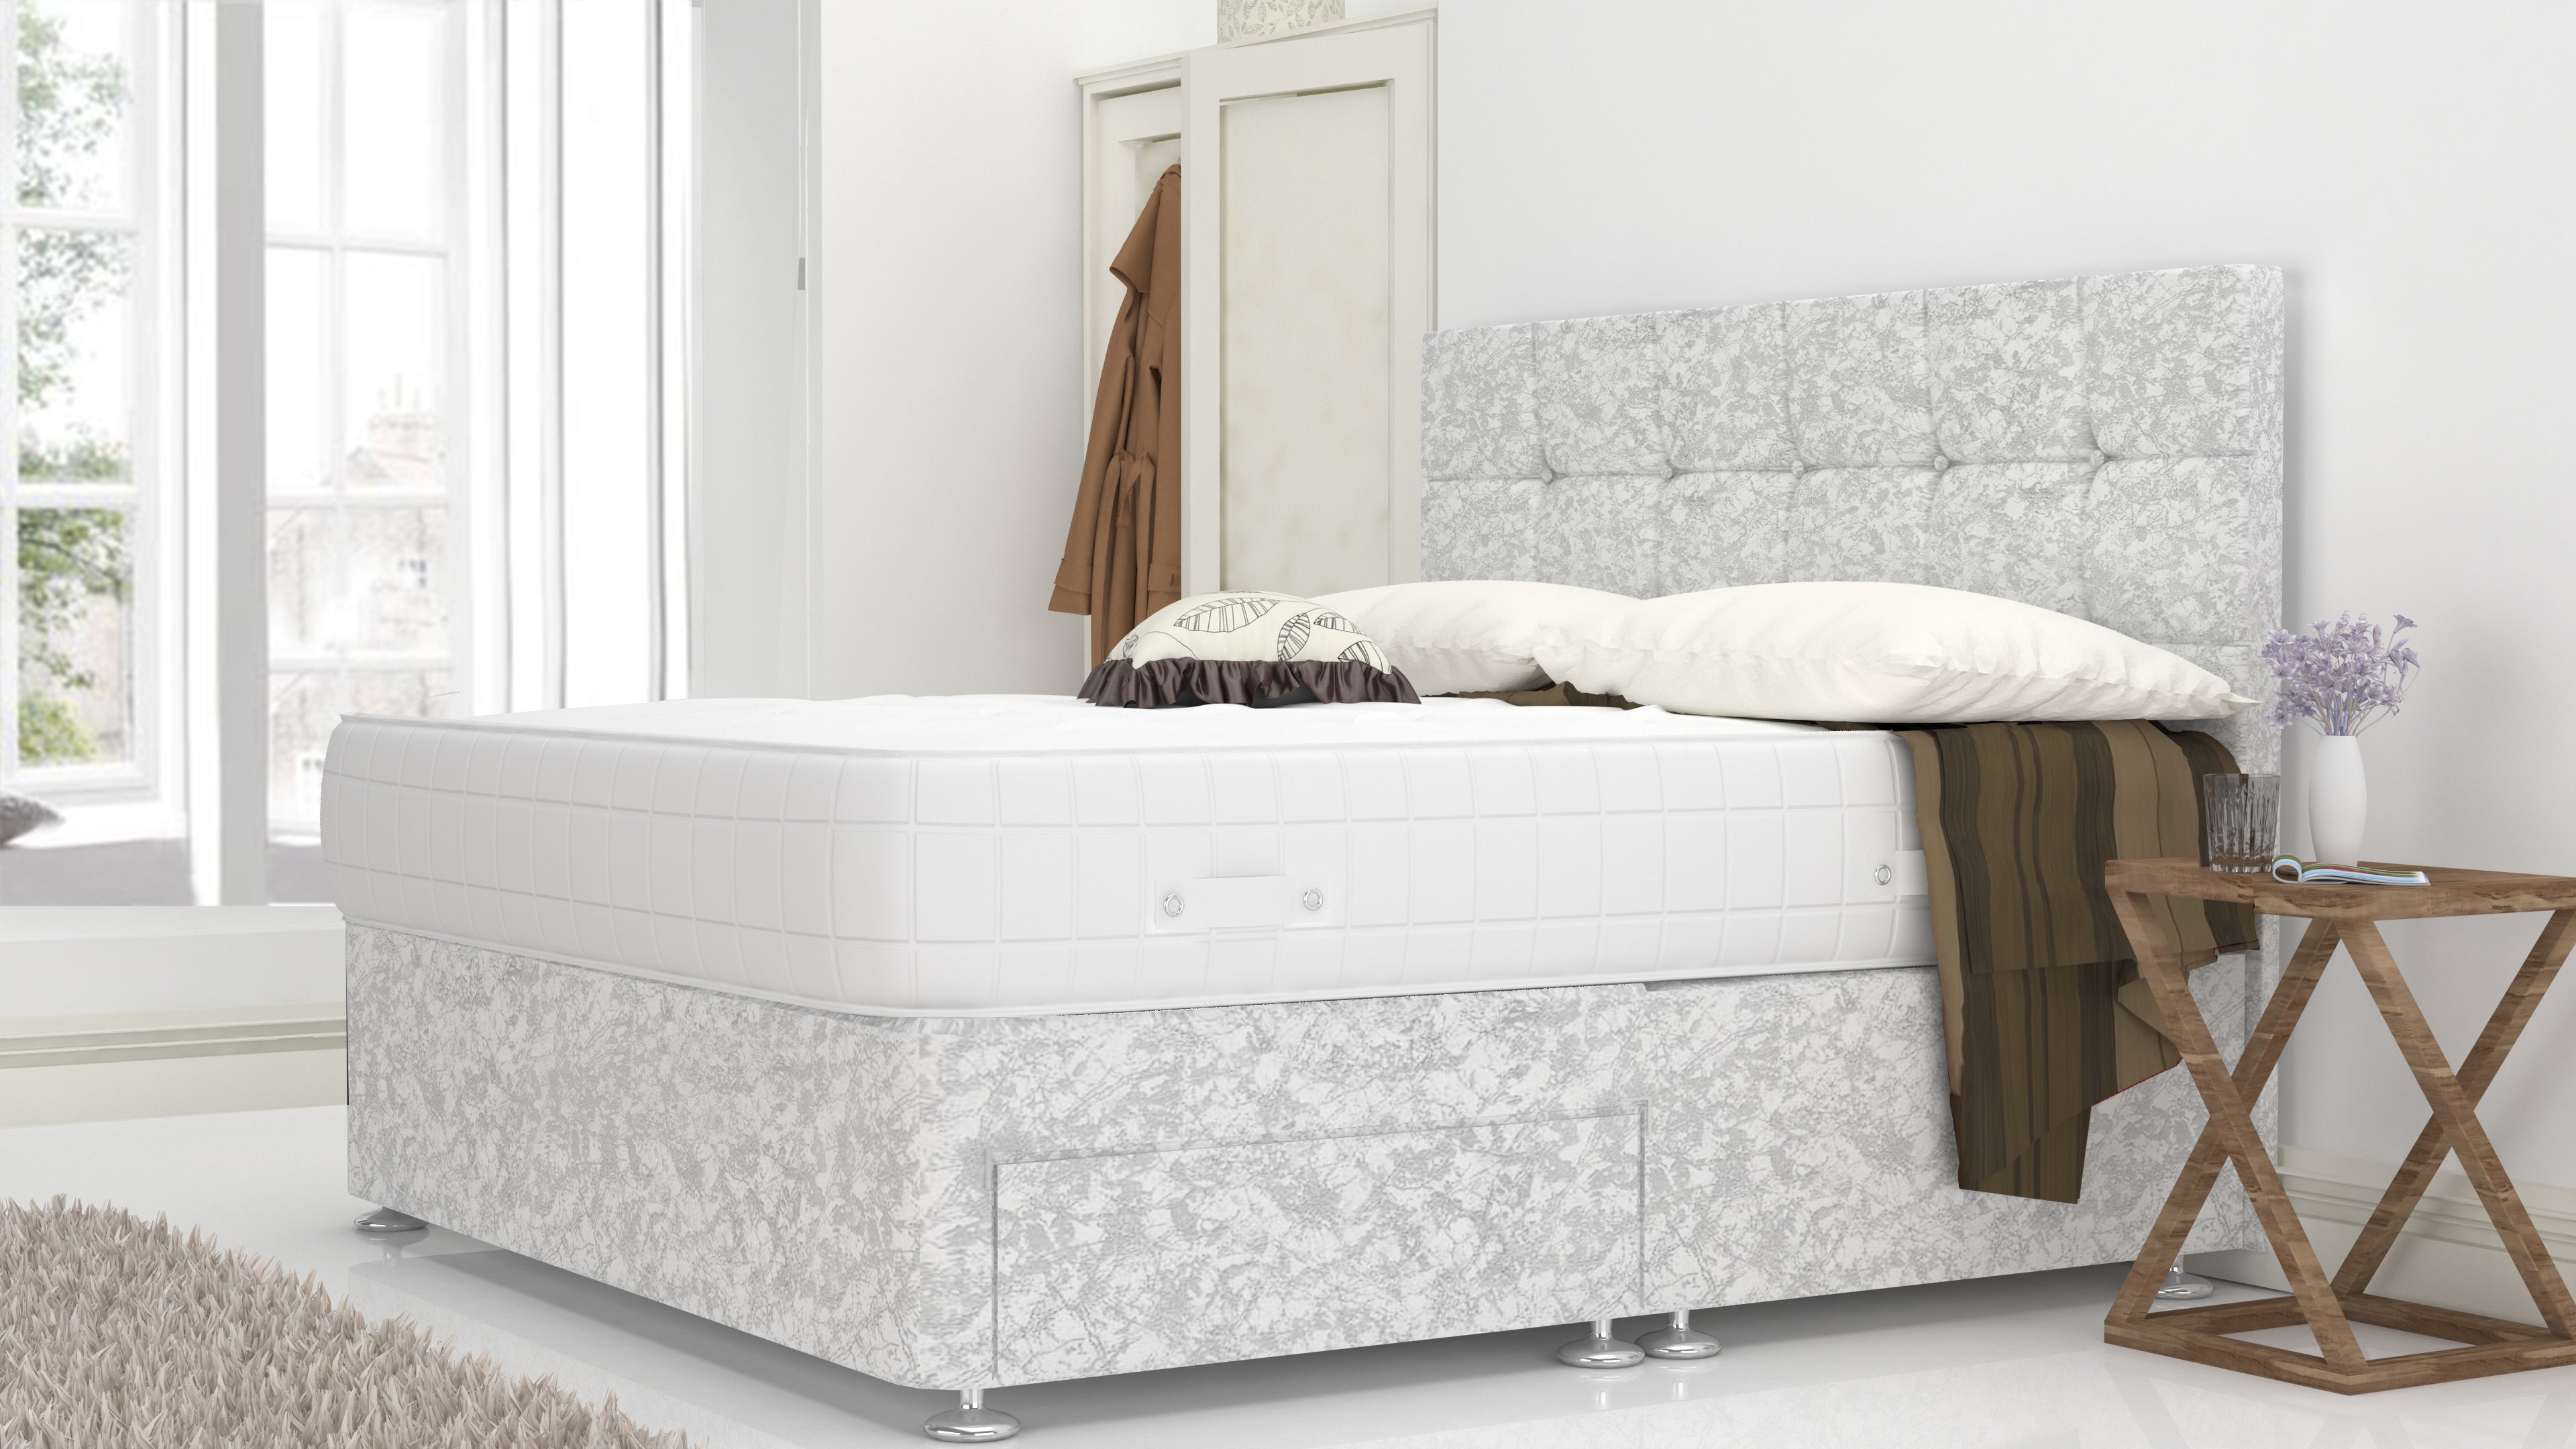 White Crushed Velvet 4 Feet Divan Bed With Cube Headboard (Included Feet) And Free Orthopedic Mattress